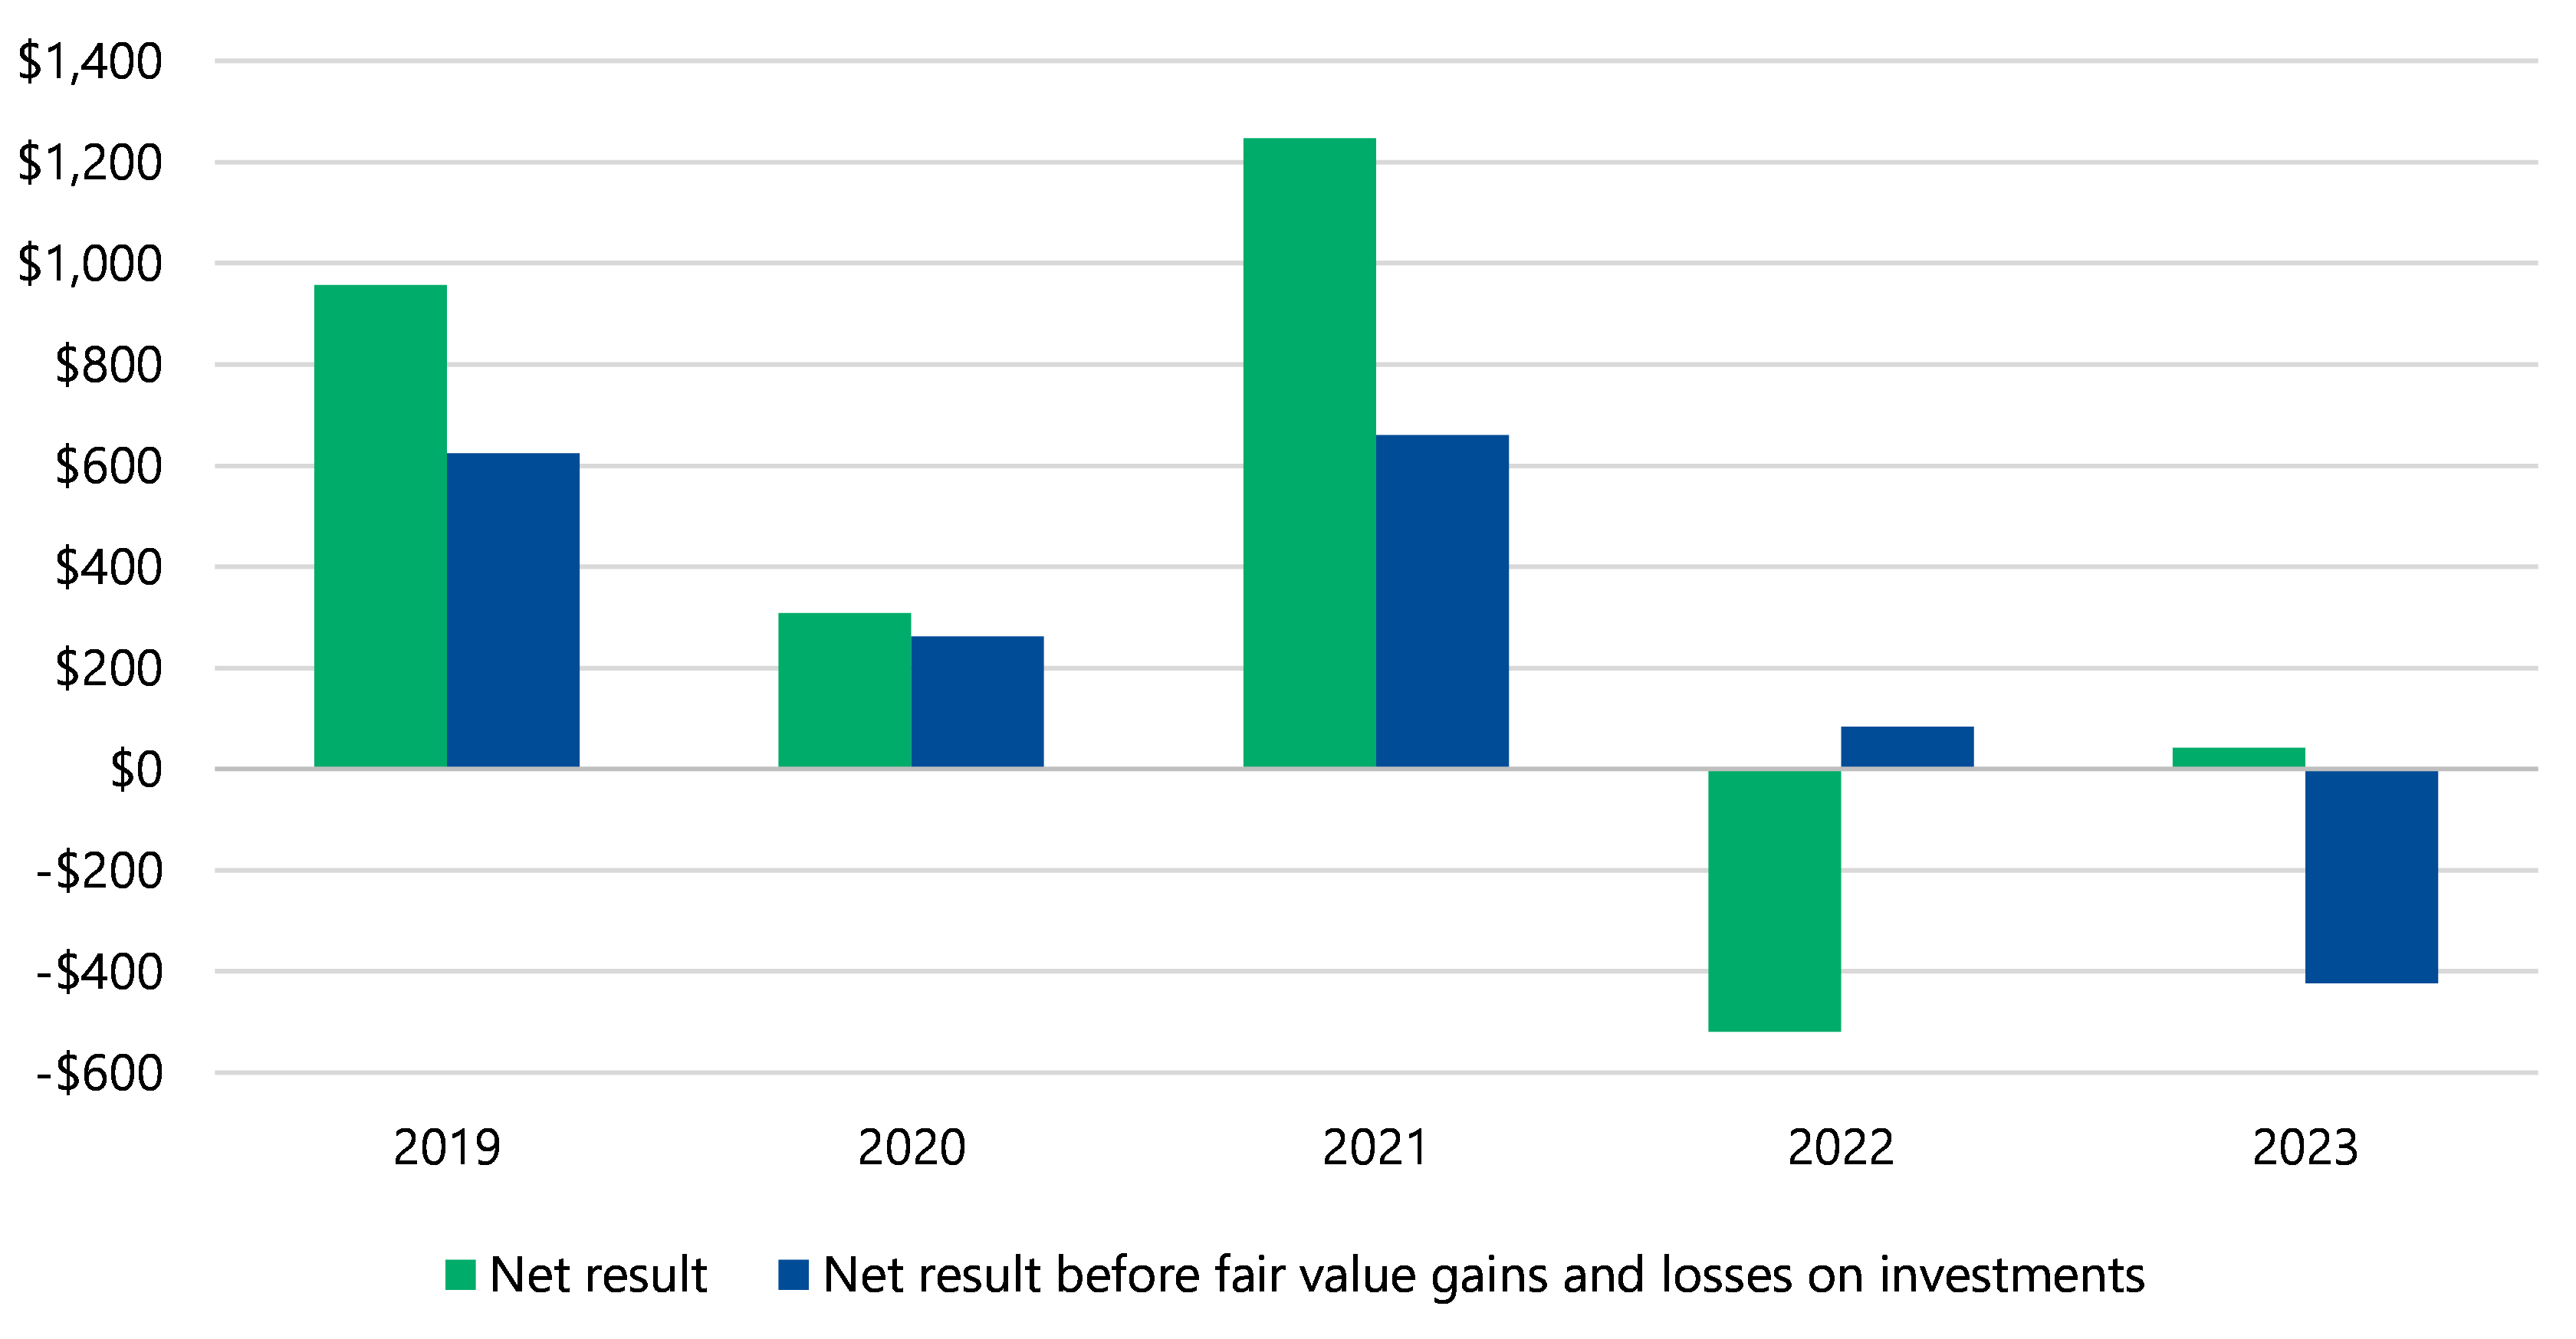 Figure 4 is a bar chart that compares the sector’s net results with its net results before fair value gains and losses on investments over 5 years, from 2019 to 2023. In 2019 the net result was between $900 million and $1,000 million and the net result before fair value gains and losses on investments was just over $600 million. In 2020 the net result was around $300 million and the net result before fair value gains and losses on investments was between $200 million and $300 million. In 2021 the net result was between $1,200 million and $1,300 million and the net result before fair value gains and losses on investments was between $600 and $700 million. In 2022 the net result was around −$500 million and the net result before fair value gains and losses on investments was just under $100 million. In 2023 net result was between $0 and $100 million and the net result before fair value gains and losses on investments was around –$400 million.